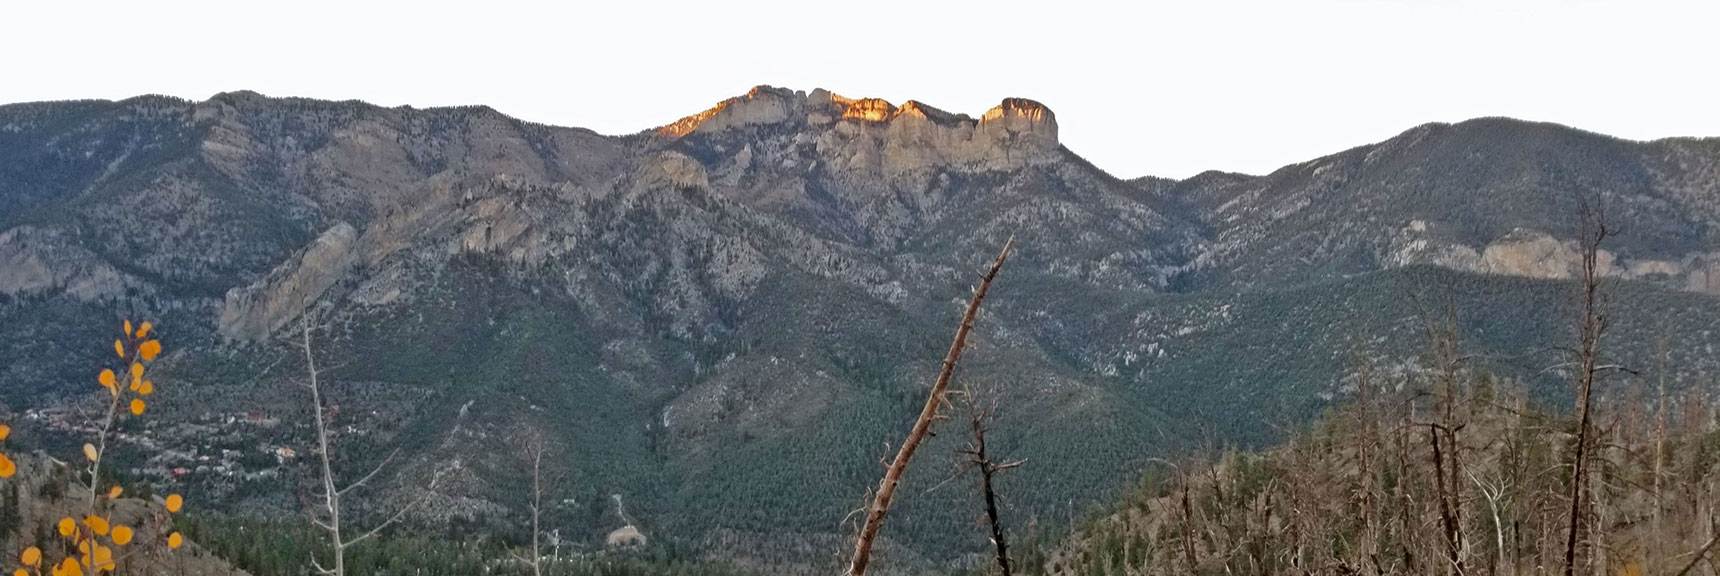 Sunset View of Mummy Mountain from Near the South Loop Trailhead | Charleston Peak Loop October Snow Dusting | Mt. Charleston Wilderness | Spring Mountains, Nevada